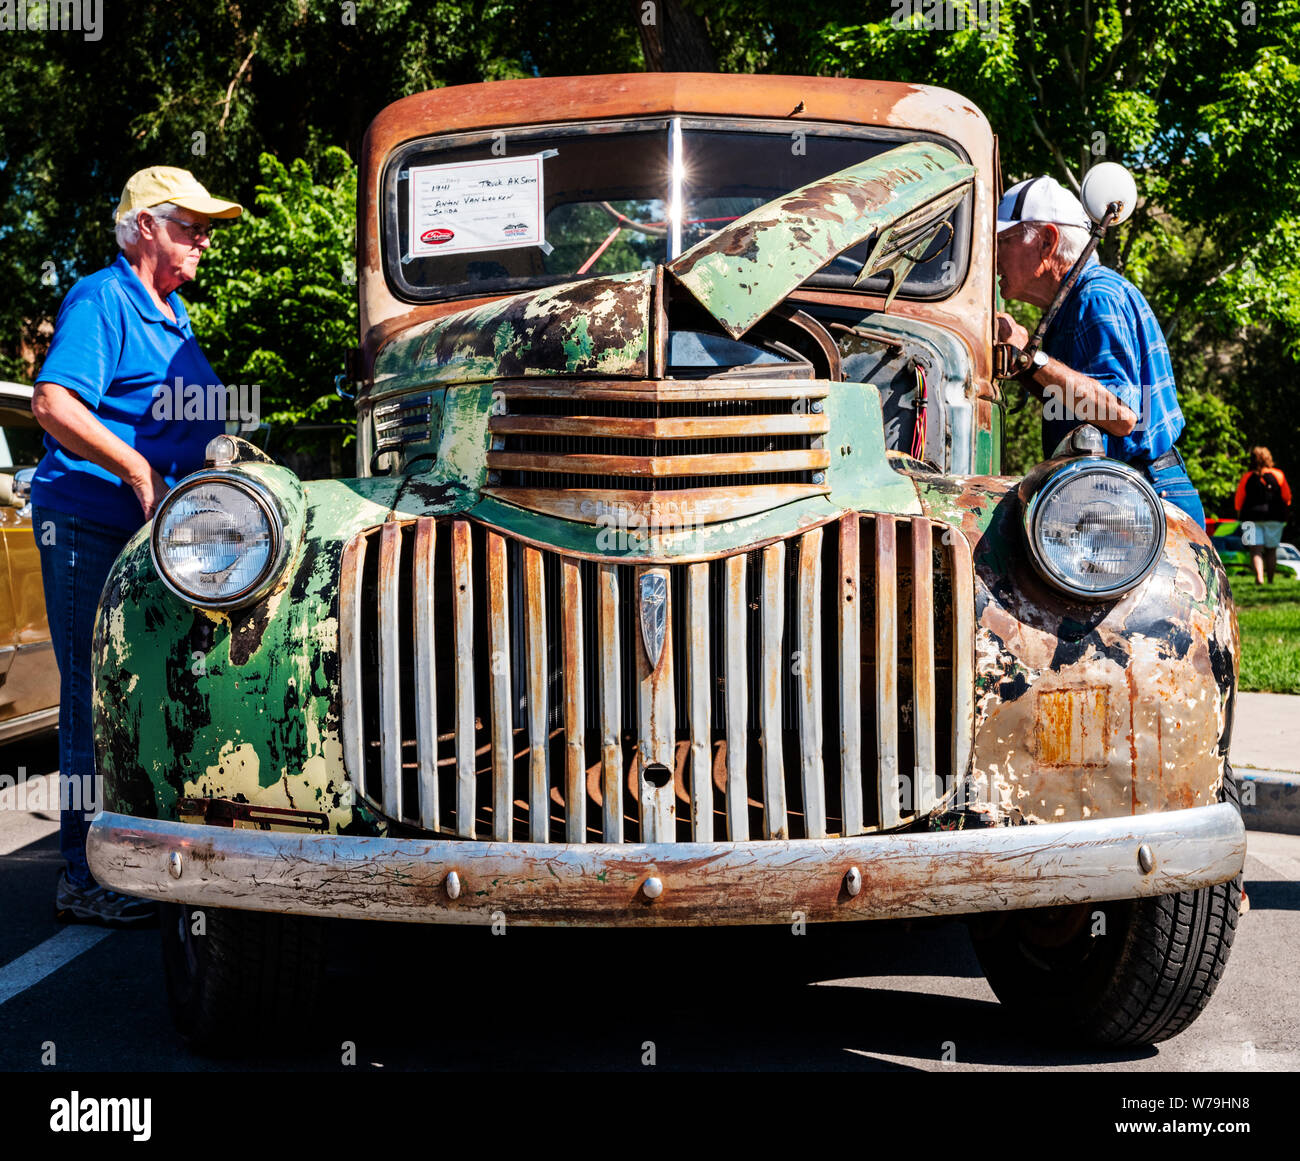 Senior couple inspecting 1941 Chevrolet truck AK Series; Angel of Shavano Car Show, fund raiser for Chaffee County Search & Rescue South, Salida, Colo Stock Photo